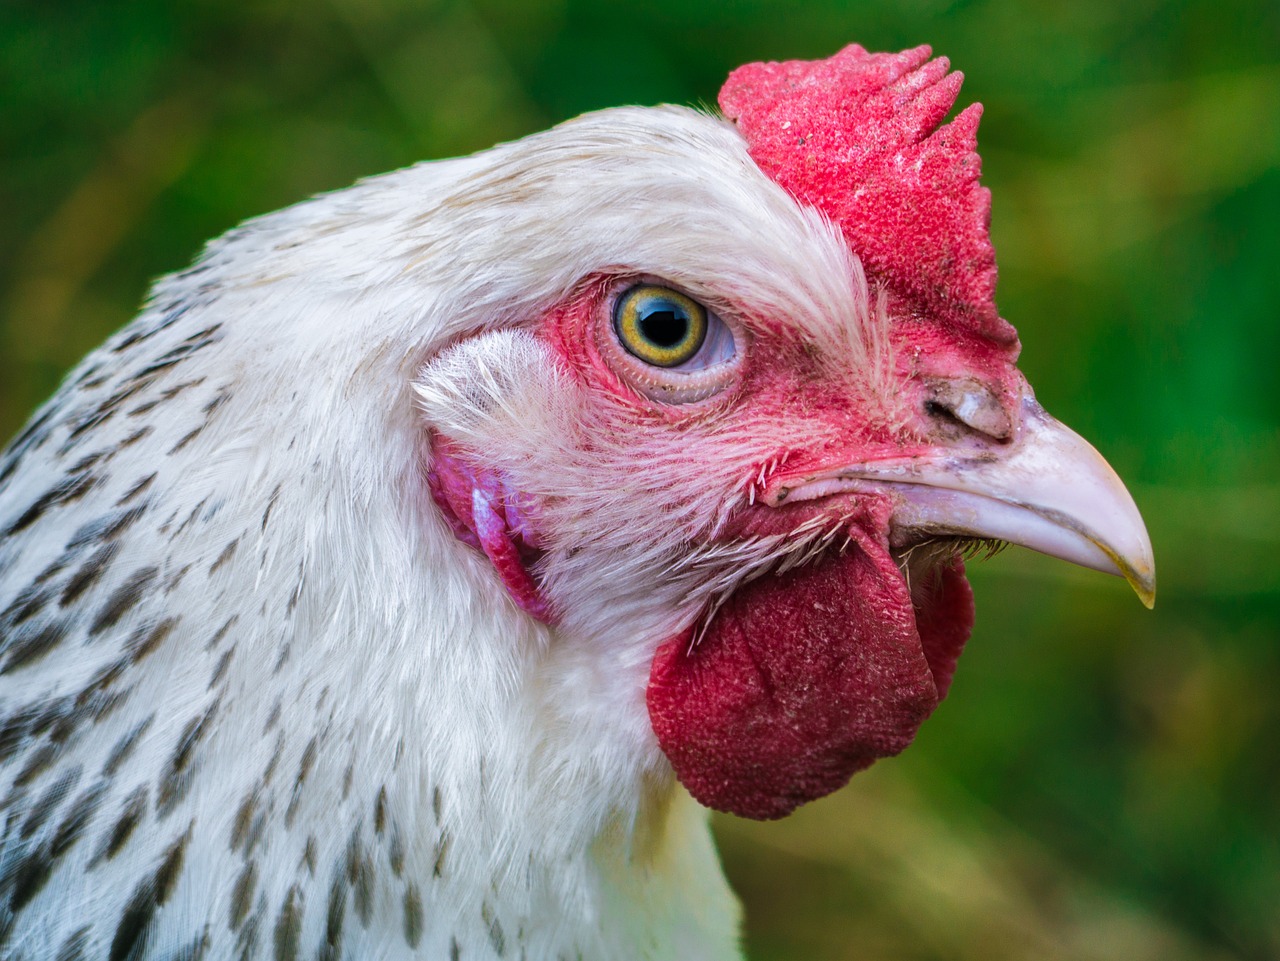 CSR: What is wrong with eating eggs and chicken? - The CSR Journal